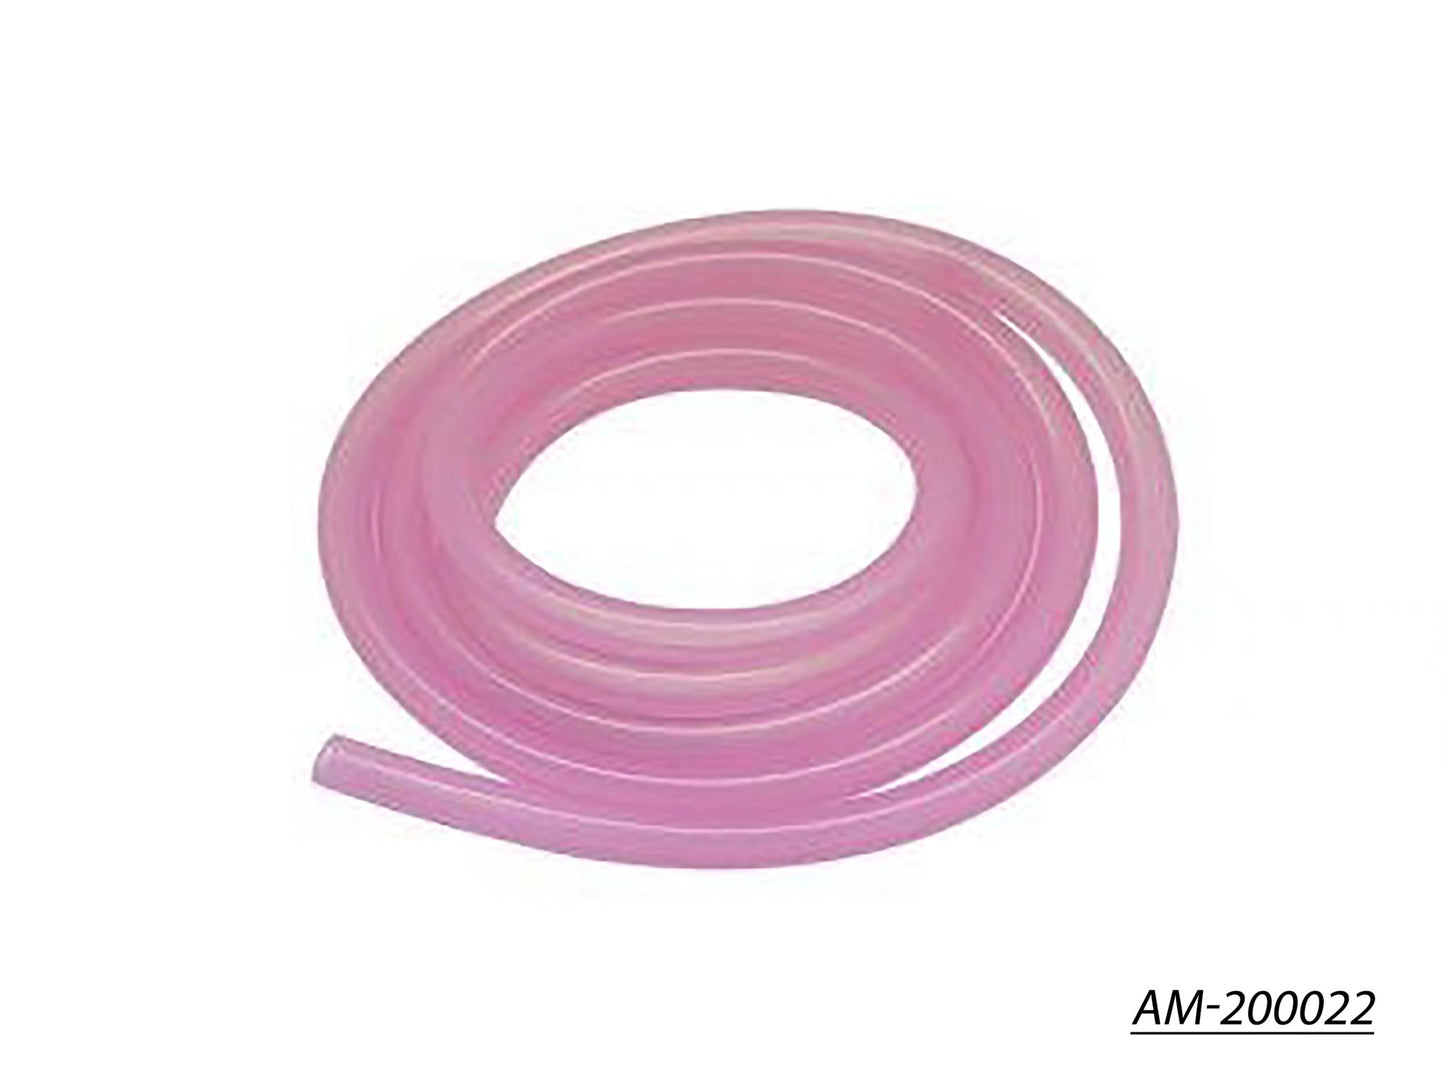 Silicone Tube - Fluorescent Pink (100CM) (AM-200022)